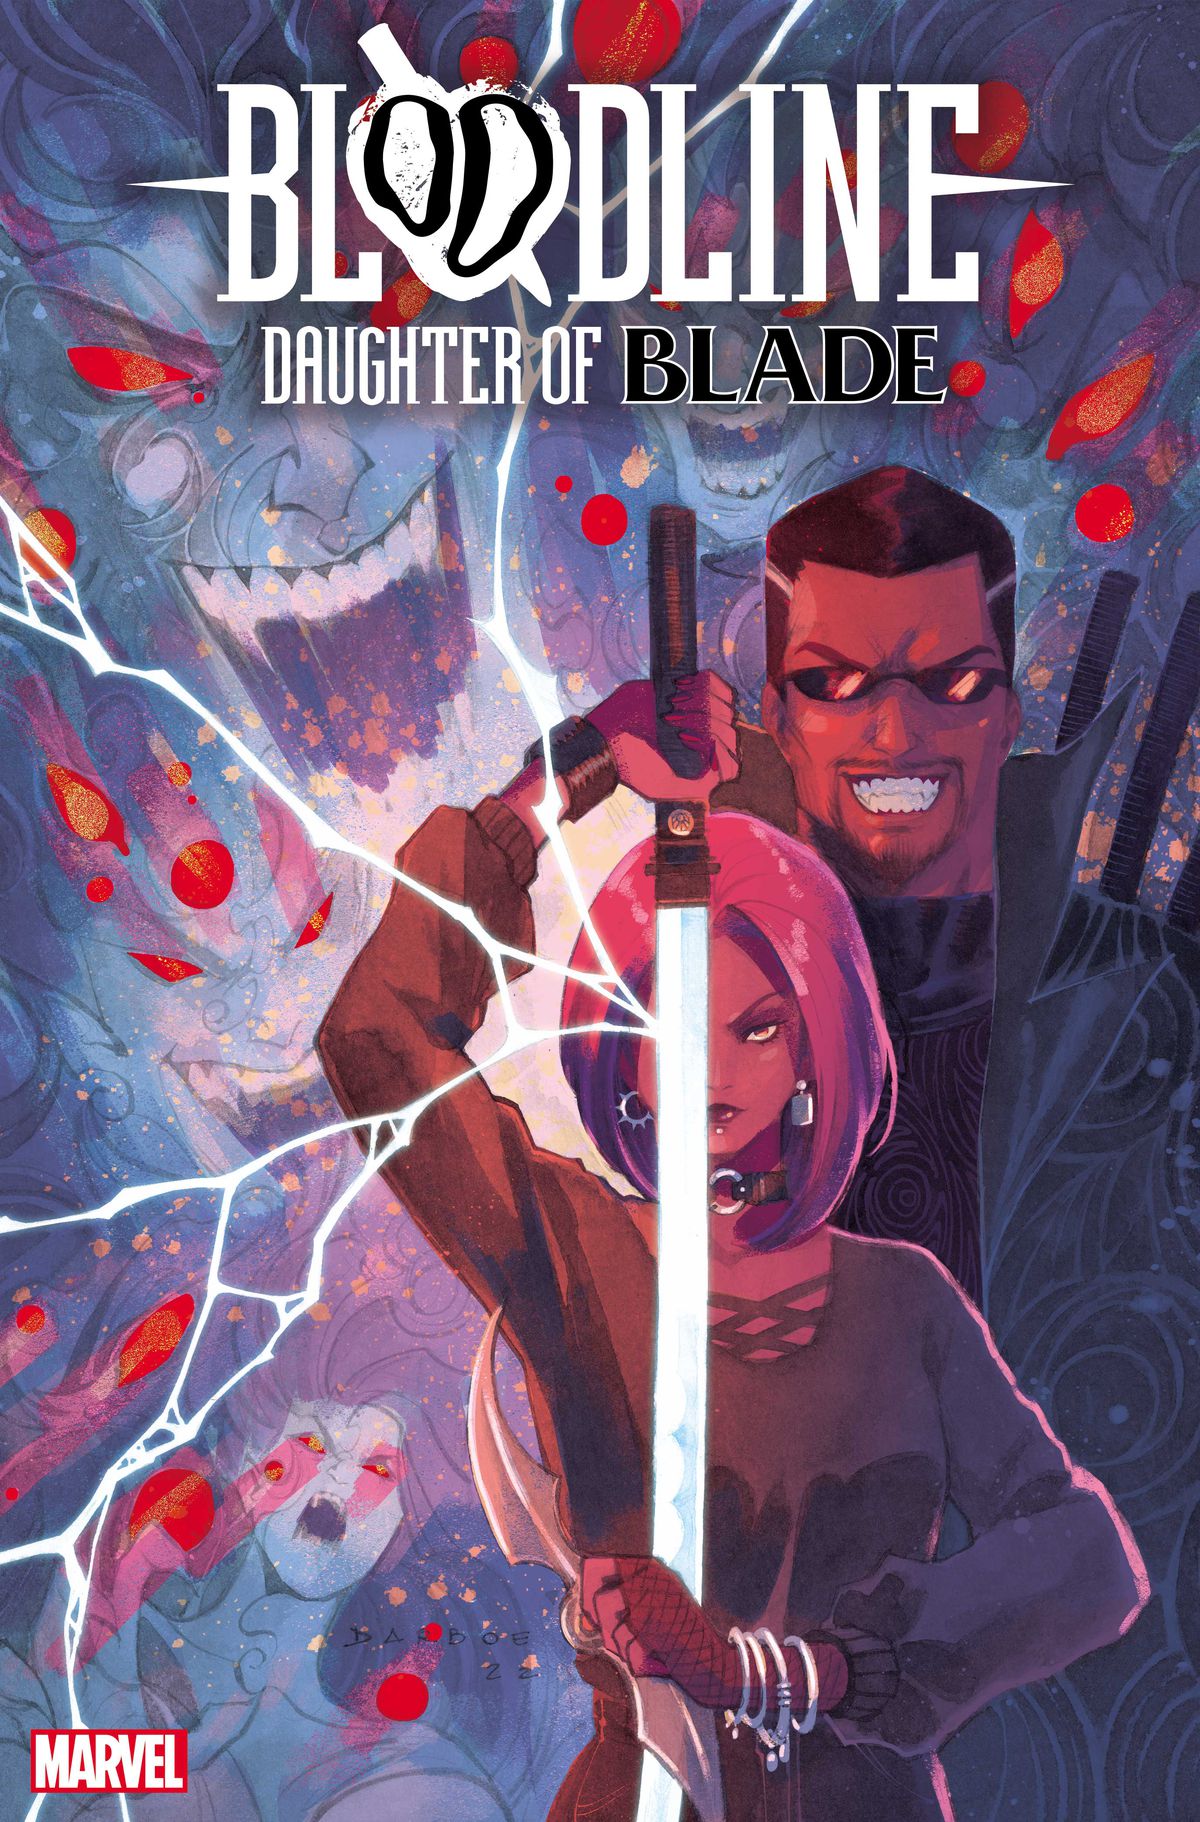 A young black woman holds a shining sword in front of her face as Blade grins behind her on the cover of Bloodline: Daughter of Blade (2023).